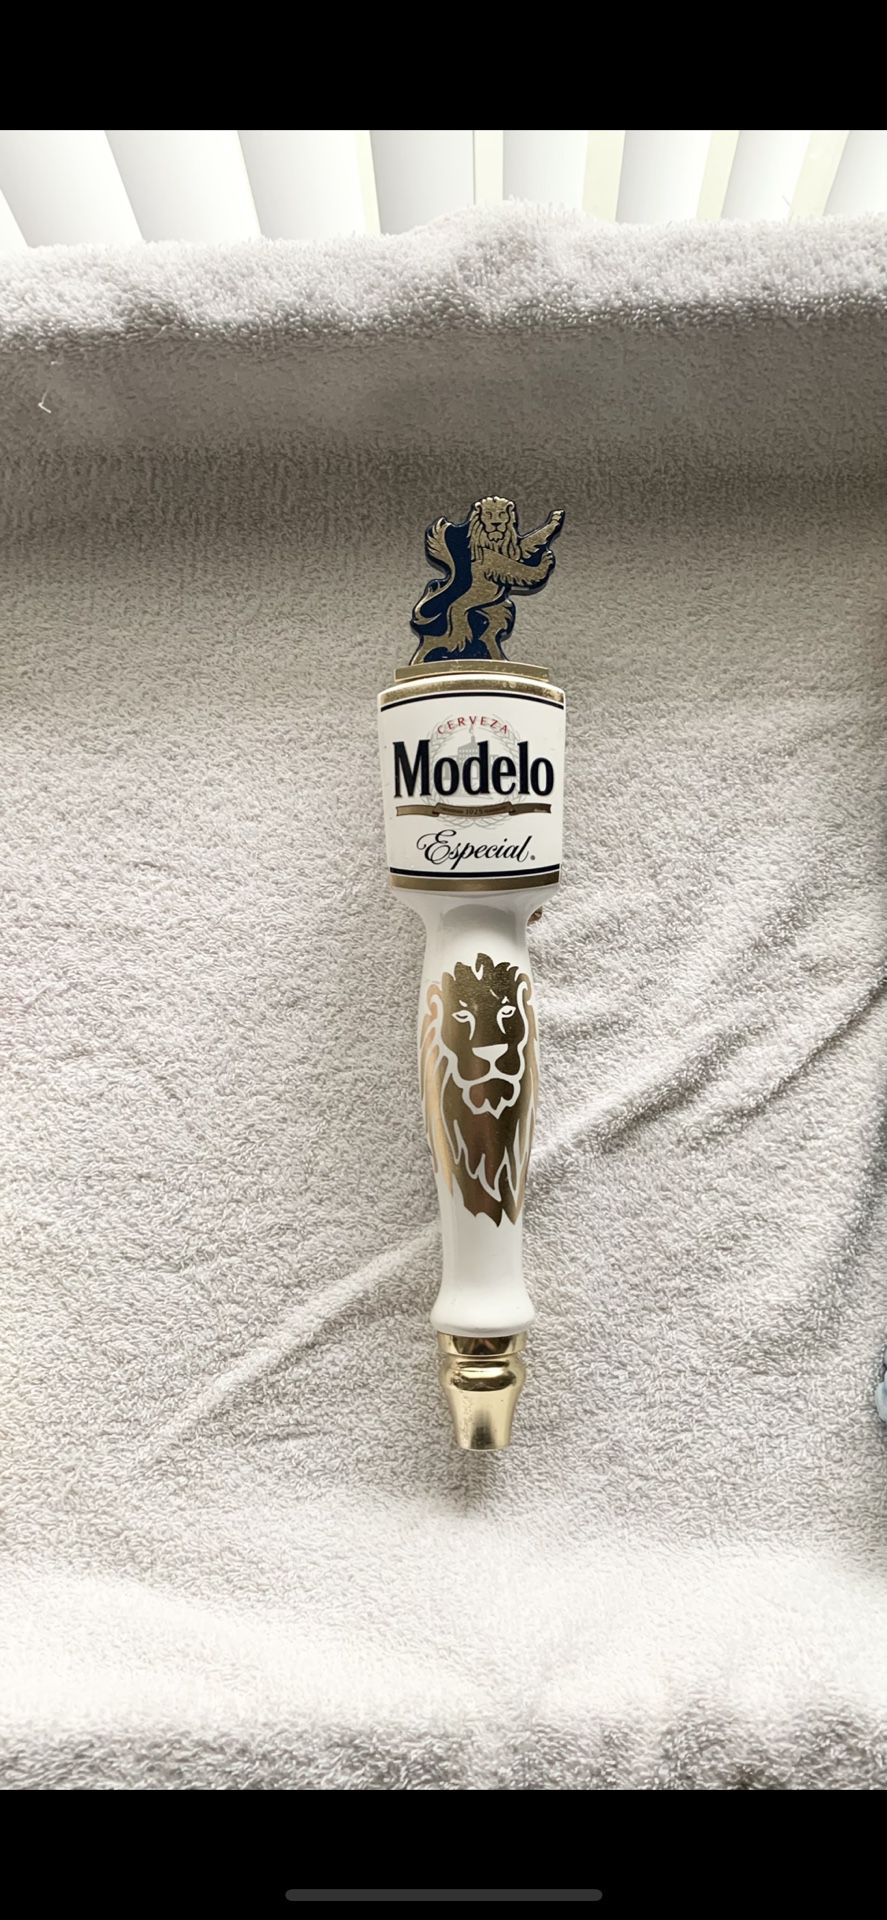 Modelo Especial Cerveza Beer Tap Handle Rare Brewery Tap with Lion Topper